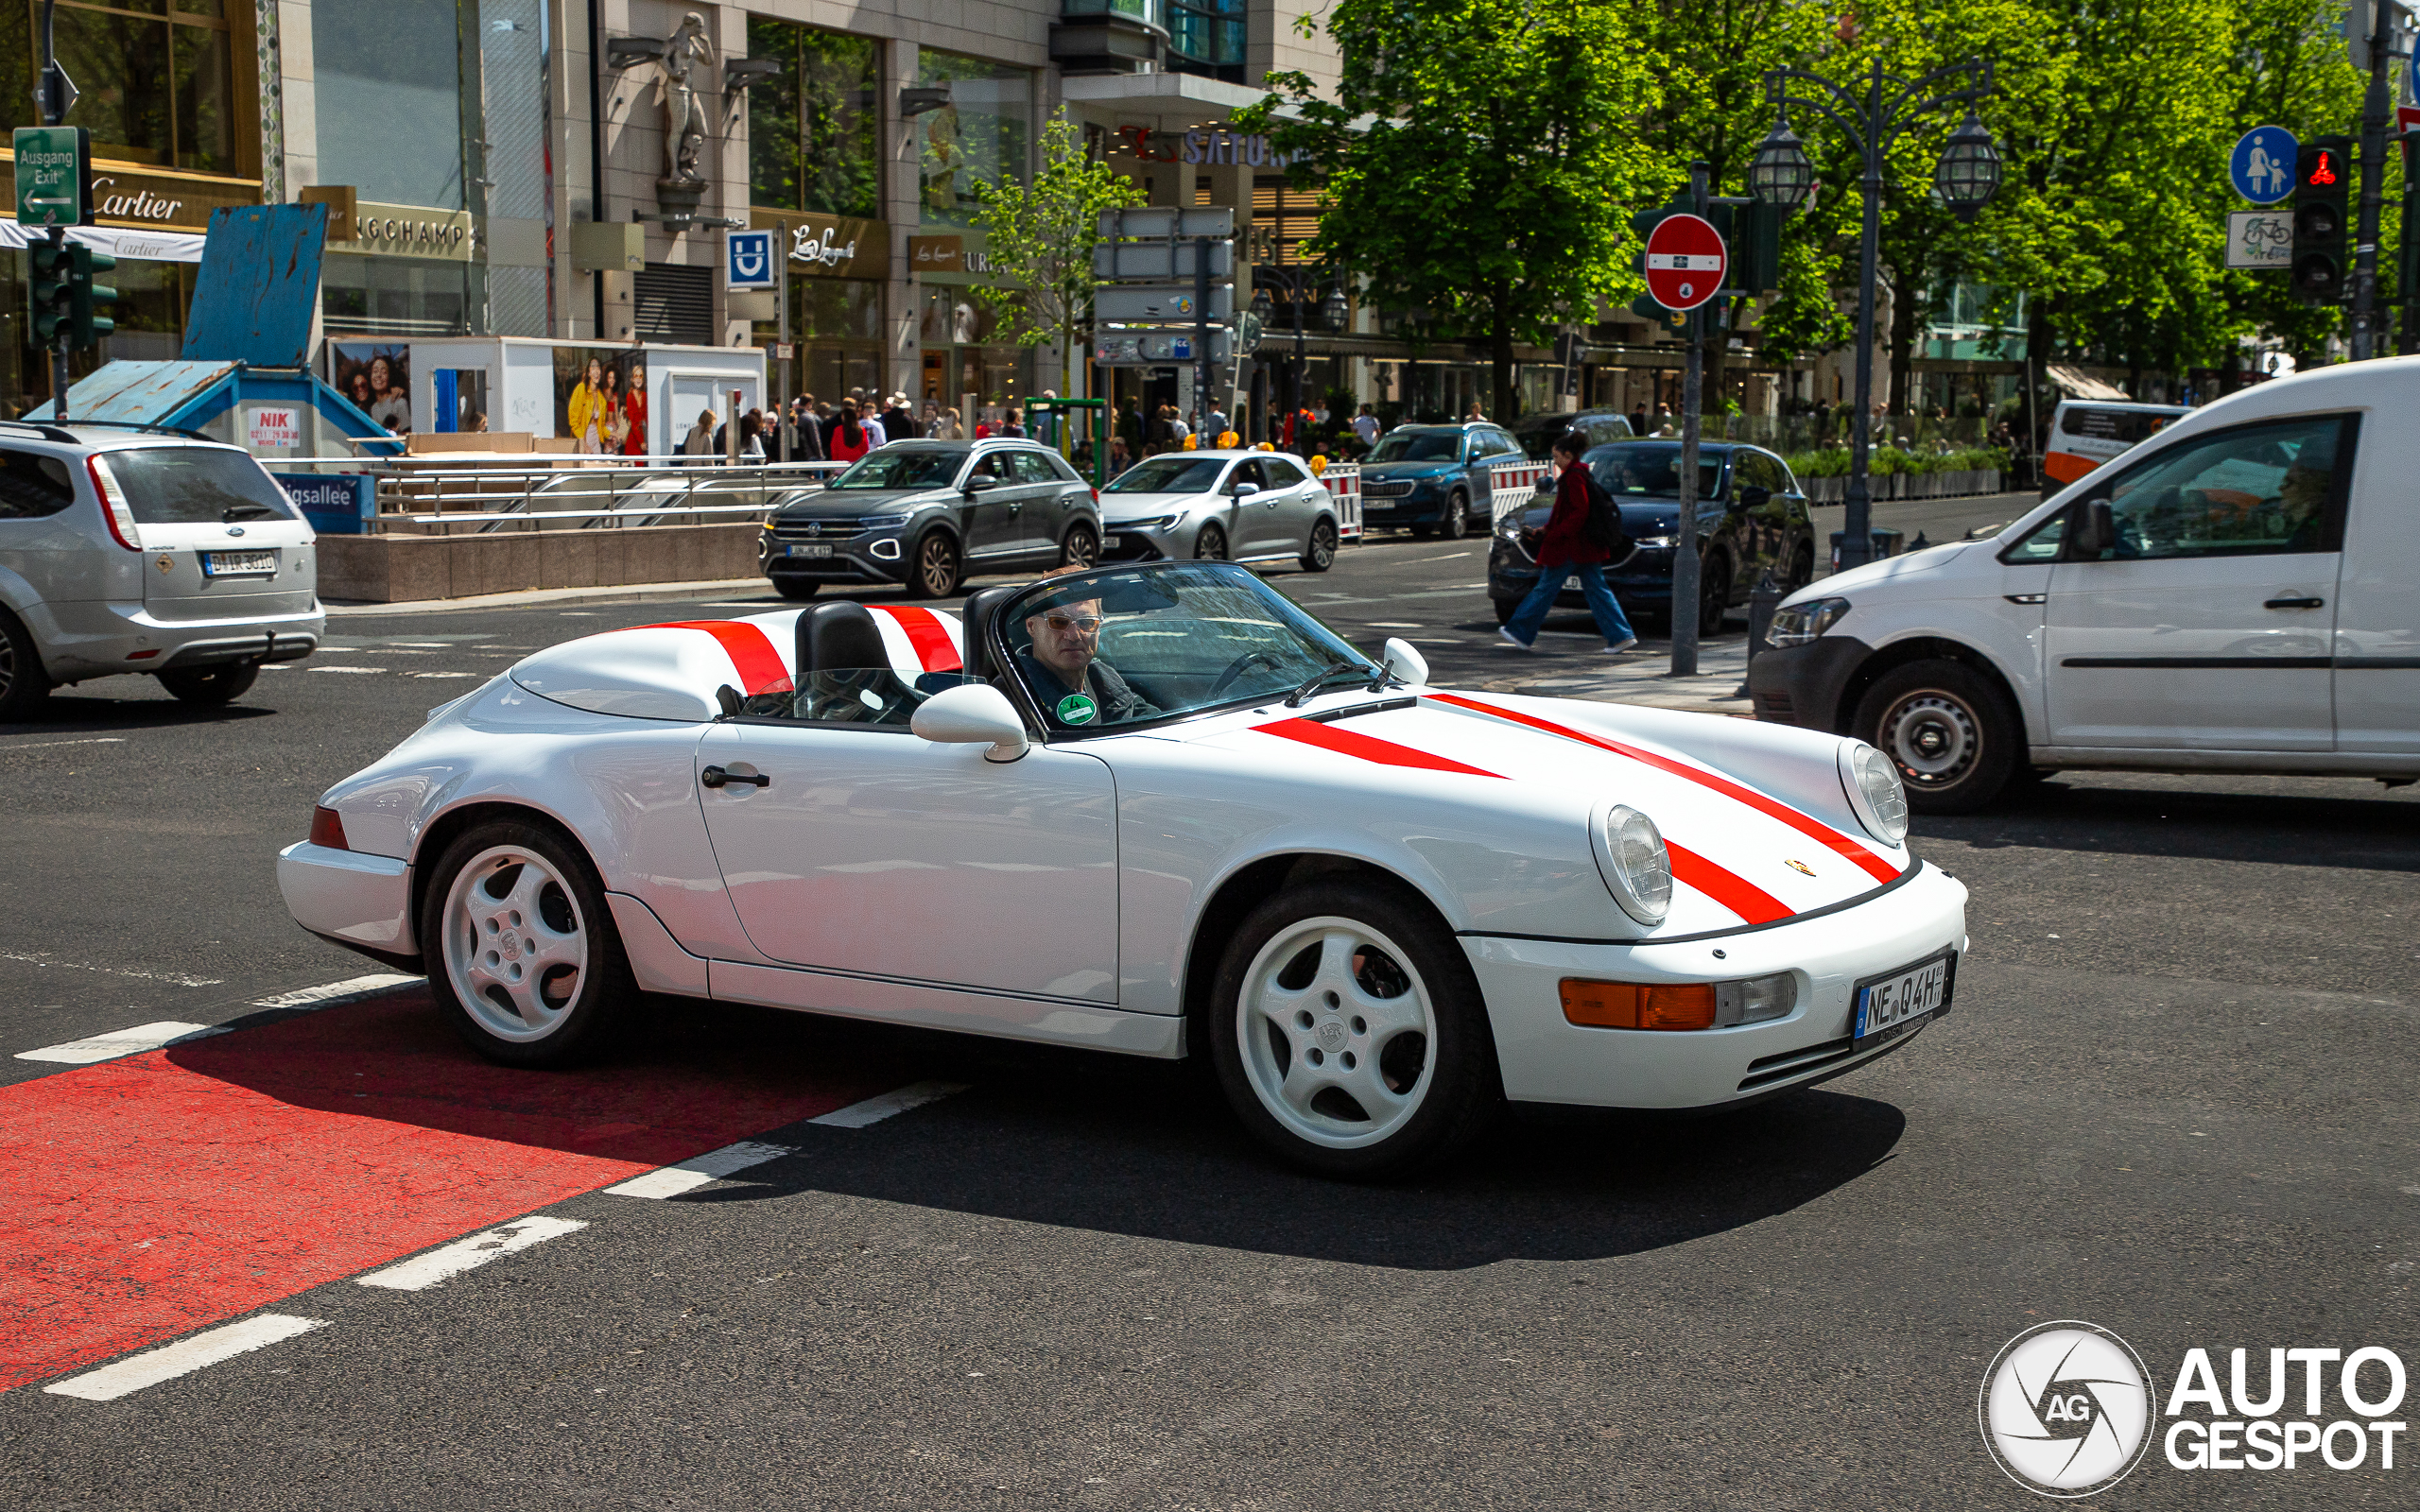 A magnificent 964 Speedster is spotted in Düsseldorf